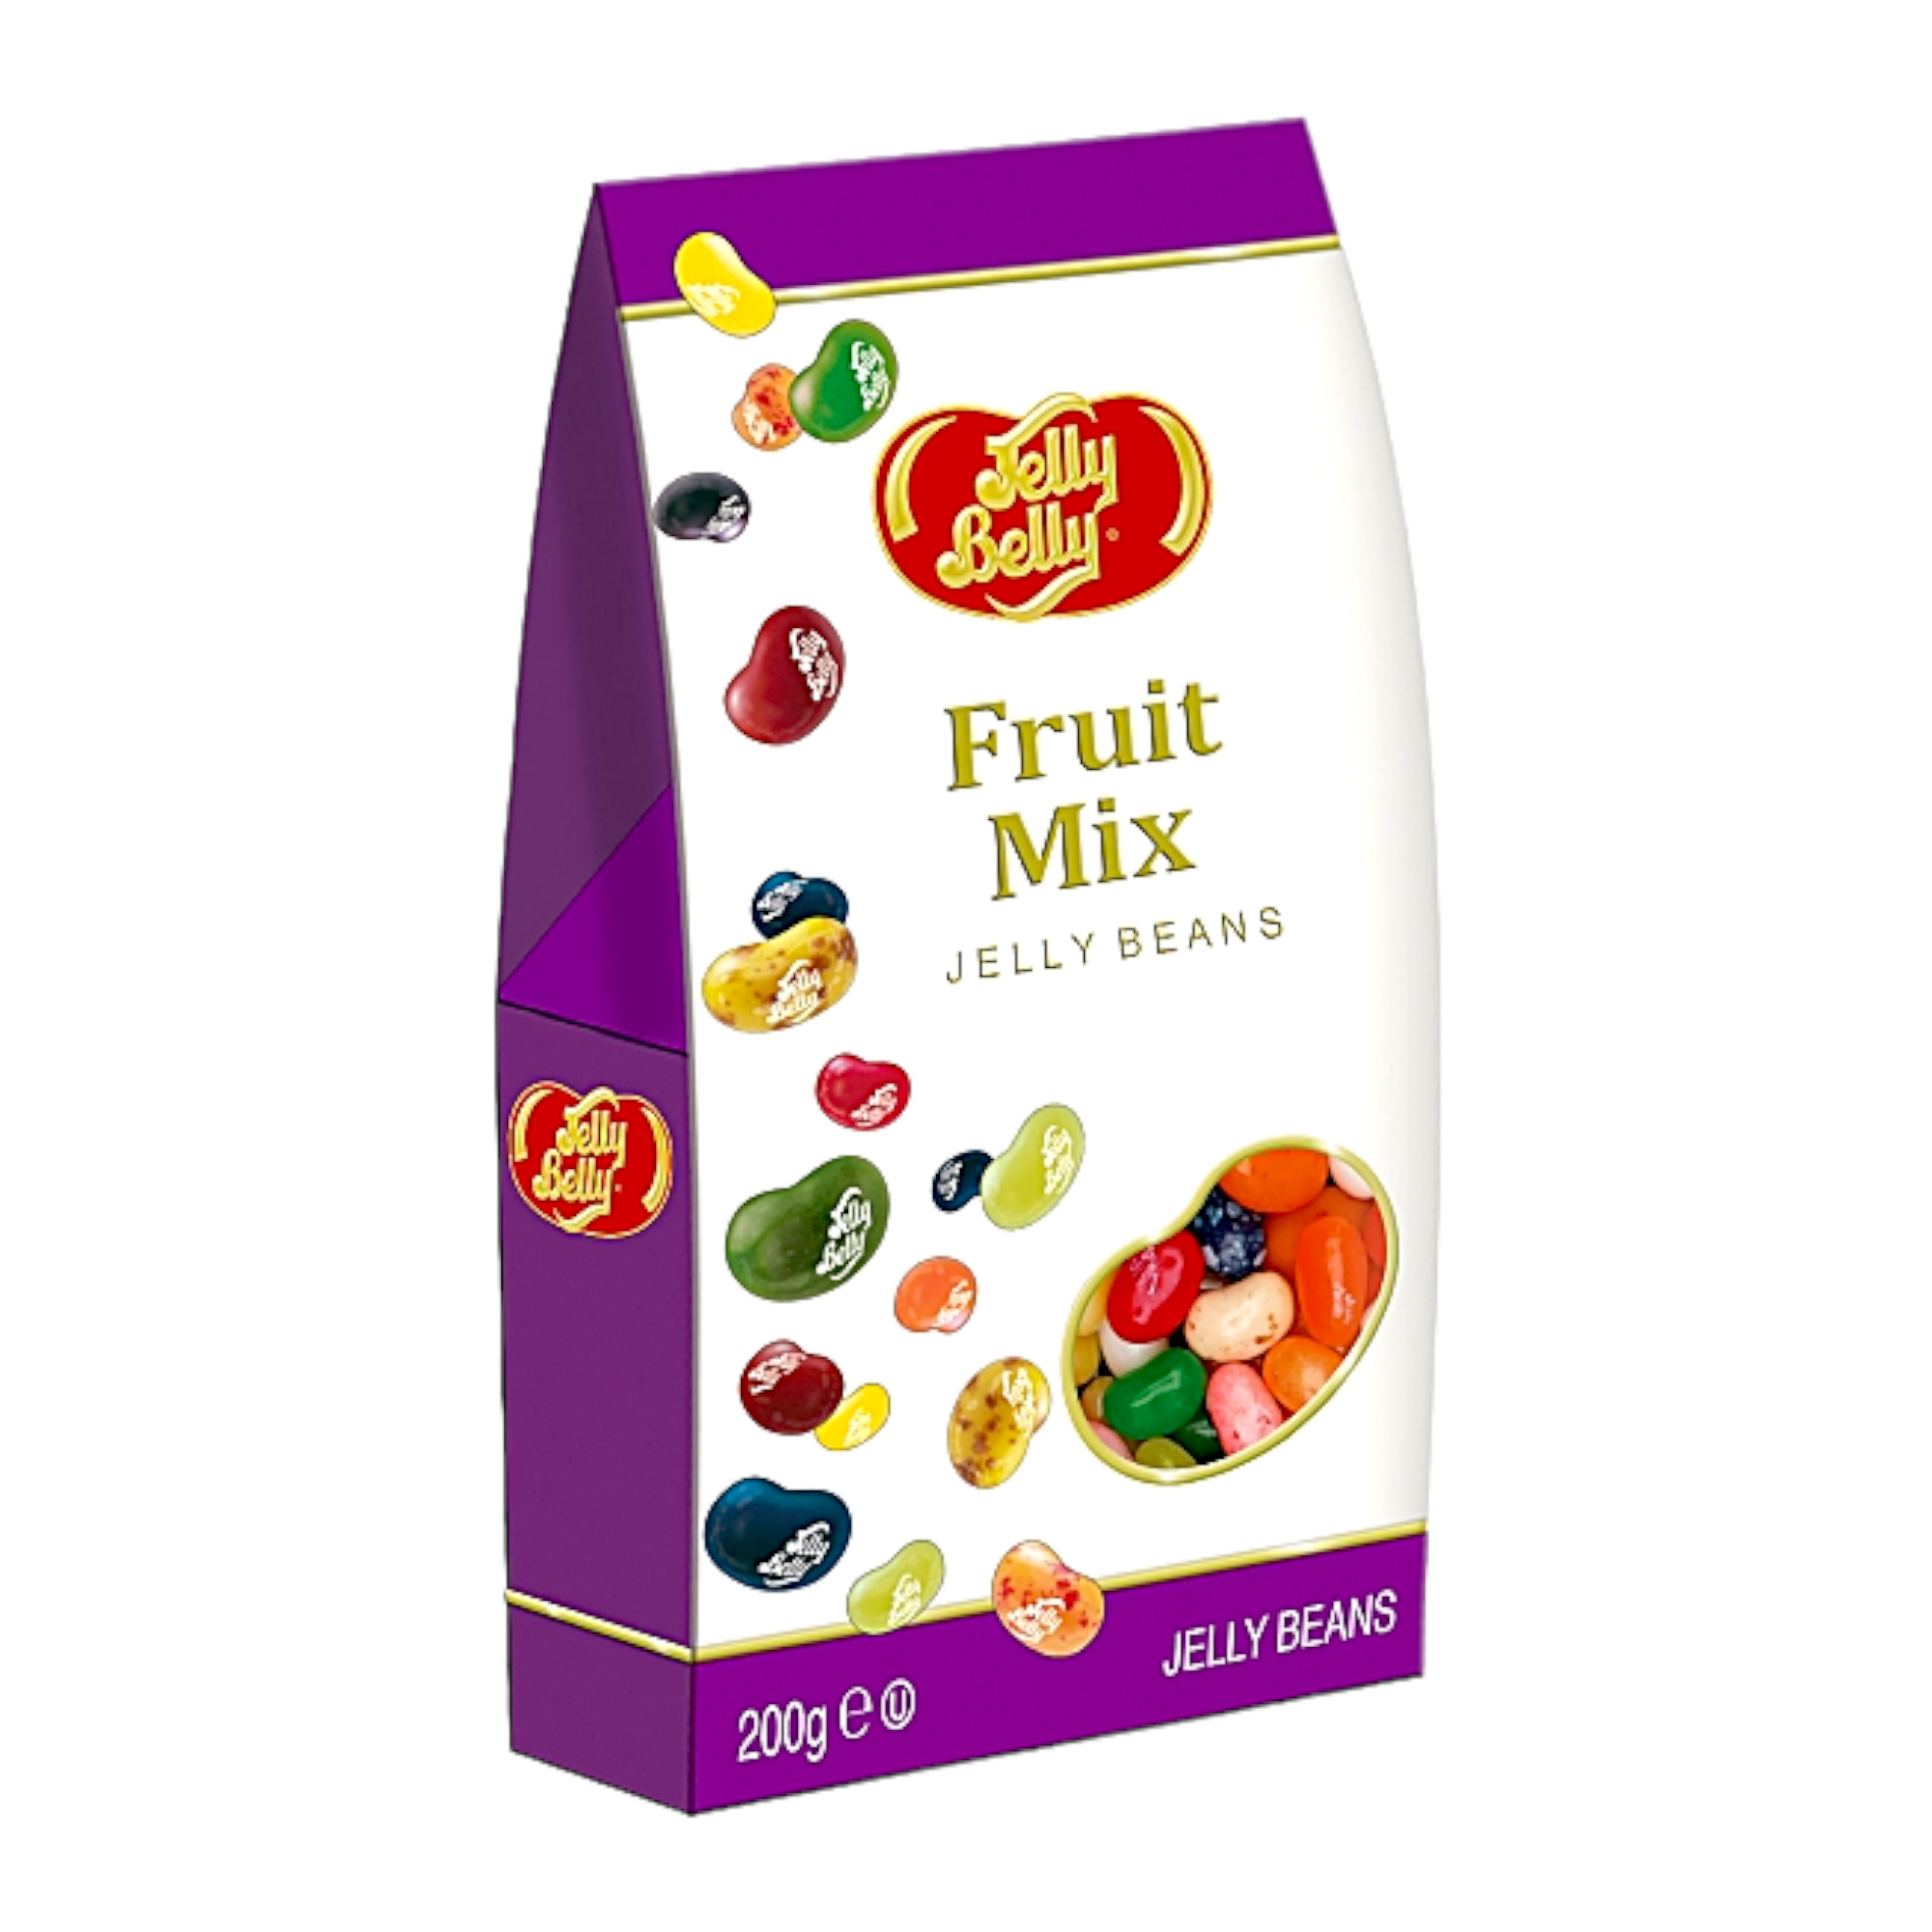 Драже Jelly belly, ассорти. Фруктовый микс, Jelly belly.. Jelly belly, фруктовое ассорти вкусы. Jelly belly Fruit Mix.